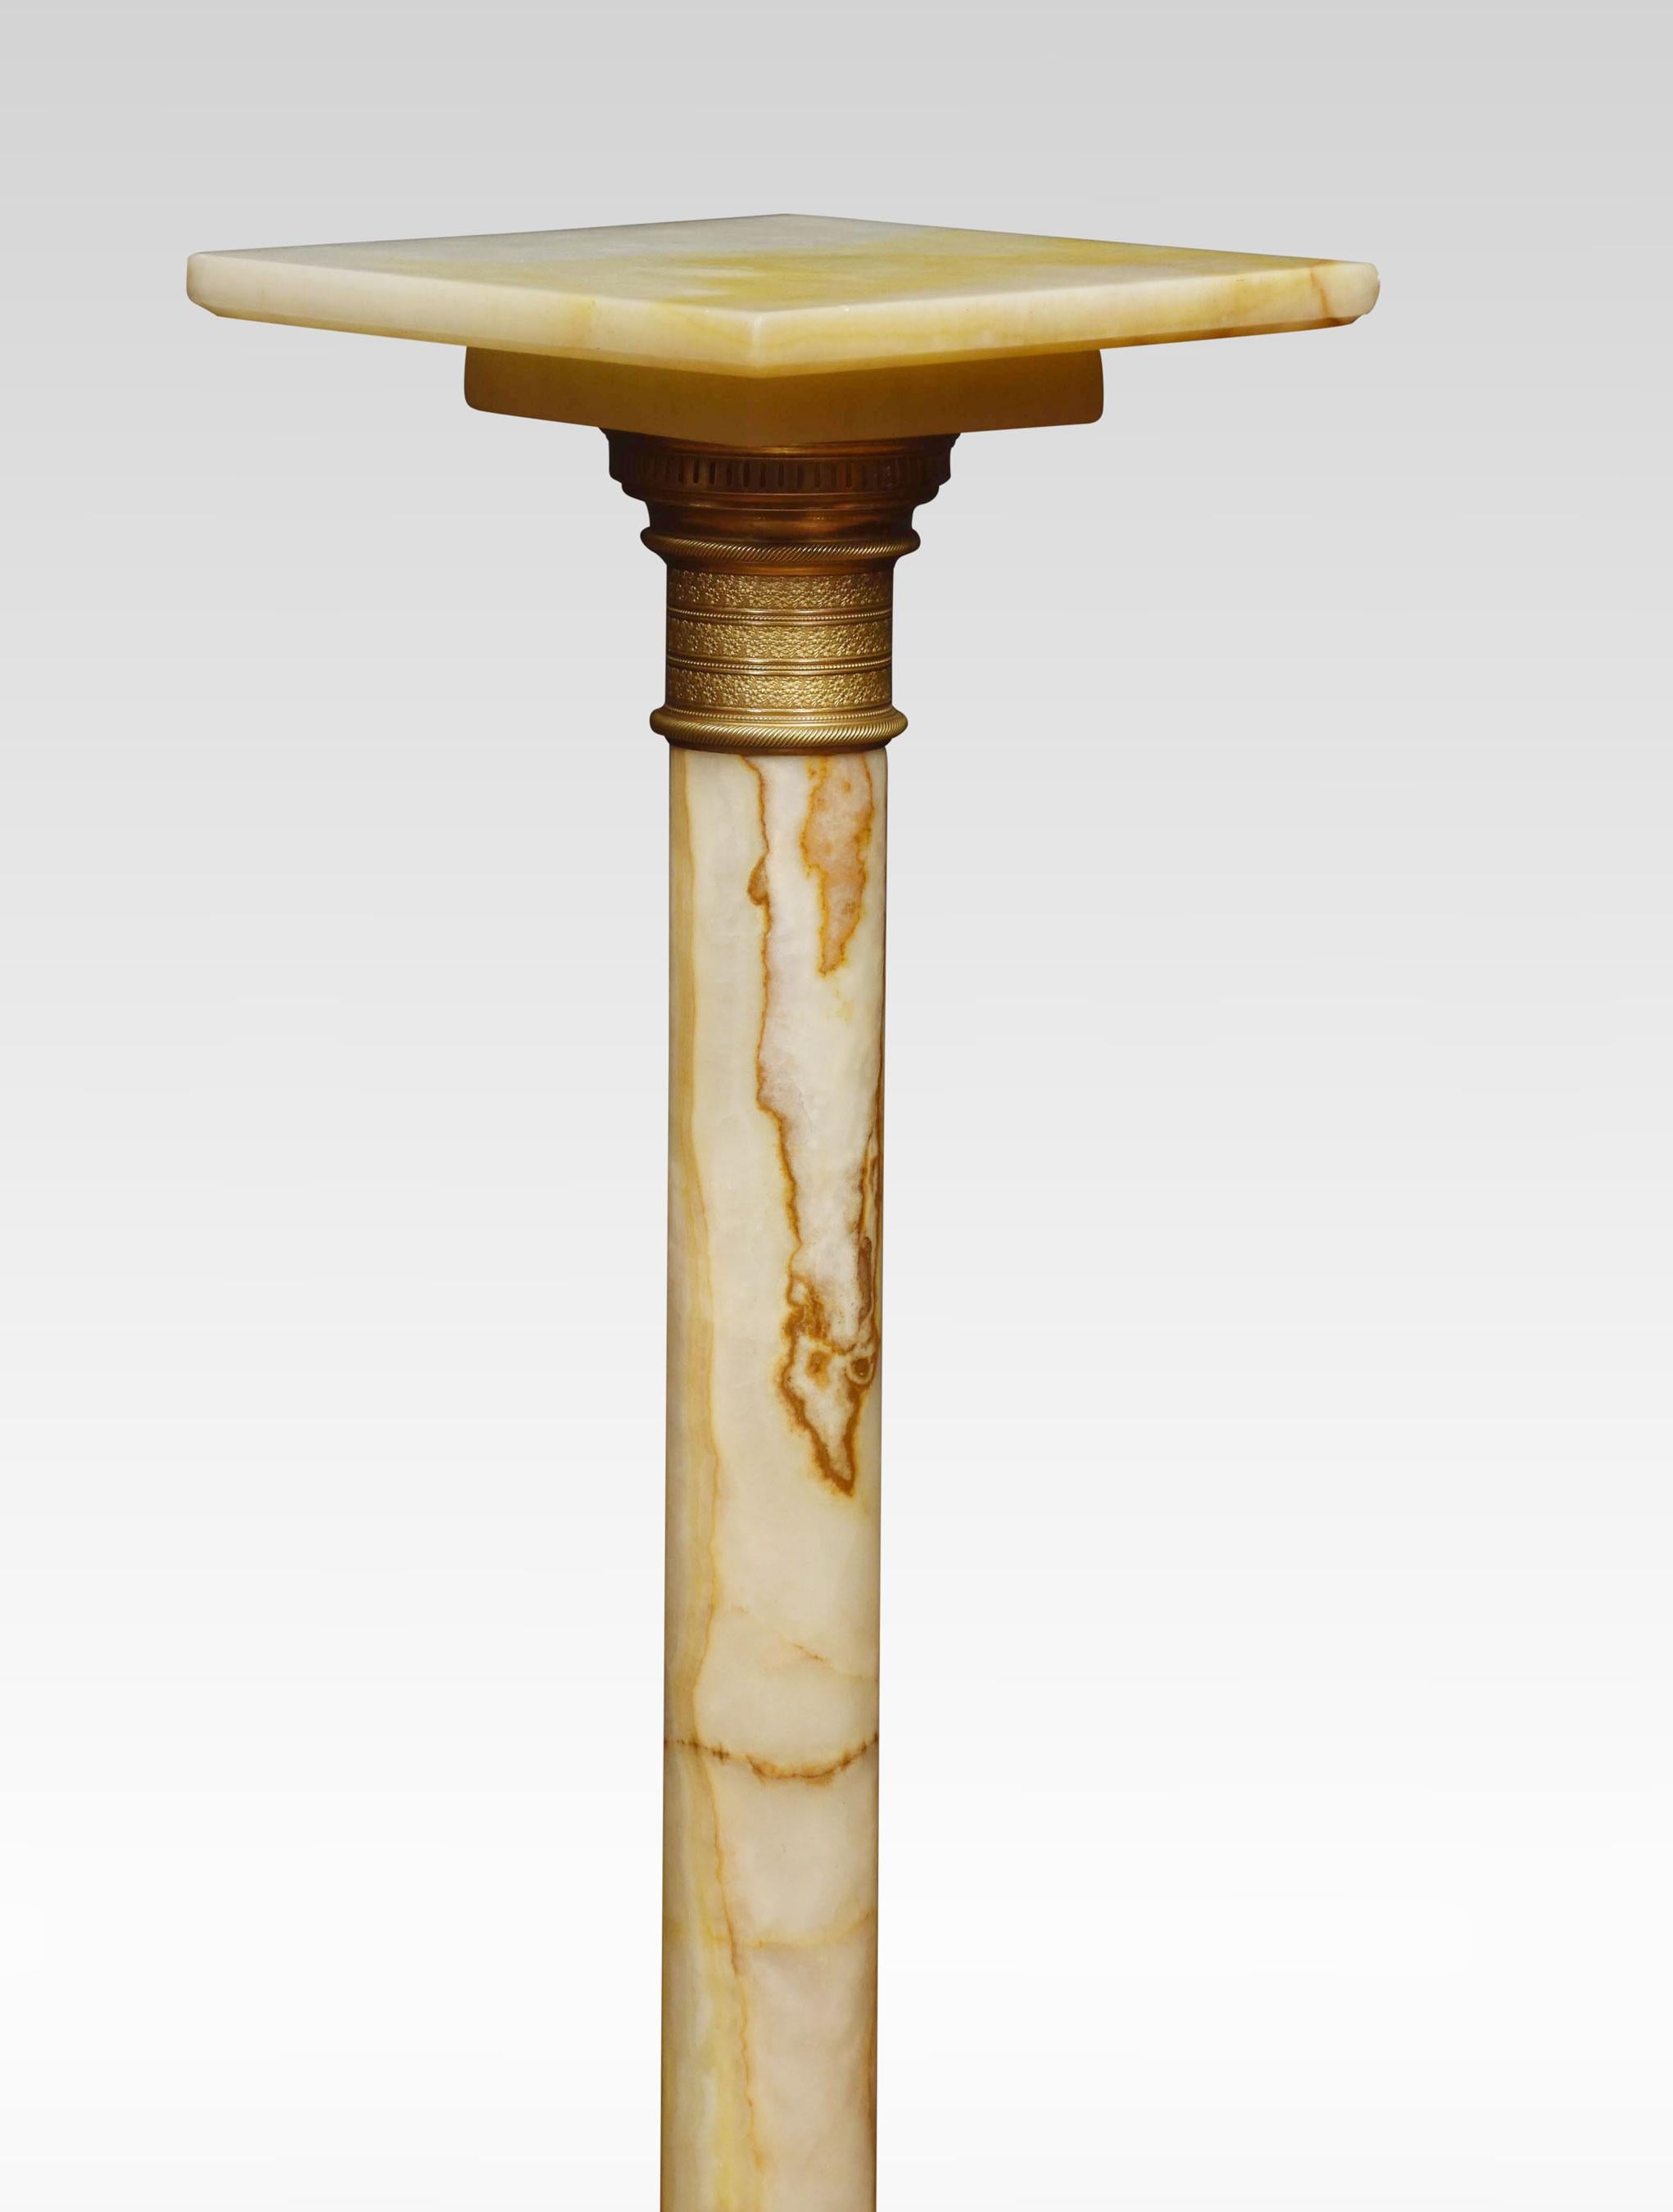 Onyx marble and Gilt Metal Mounted Pedestal, with square top above scrolling leaf cast socles and column supports, raised on stepped platform bases, terminating in bracket feet.
Dimensions
Height 39 Inches
Width 10 Inches
Depth 10 Inches.